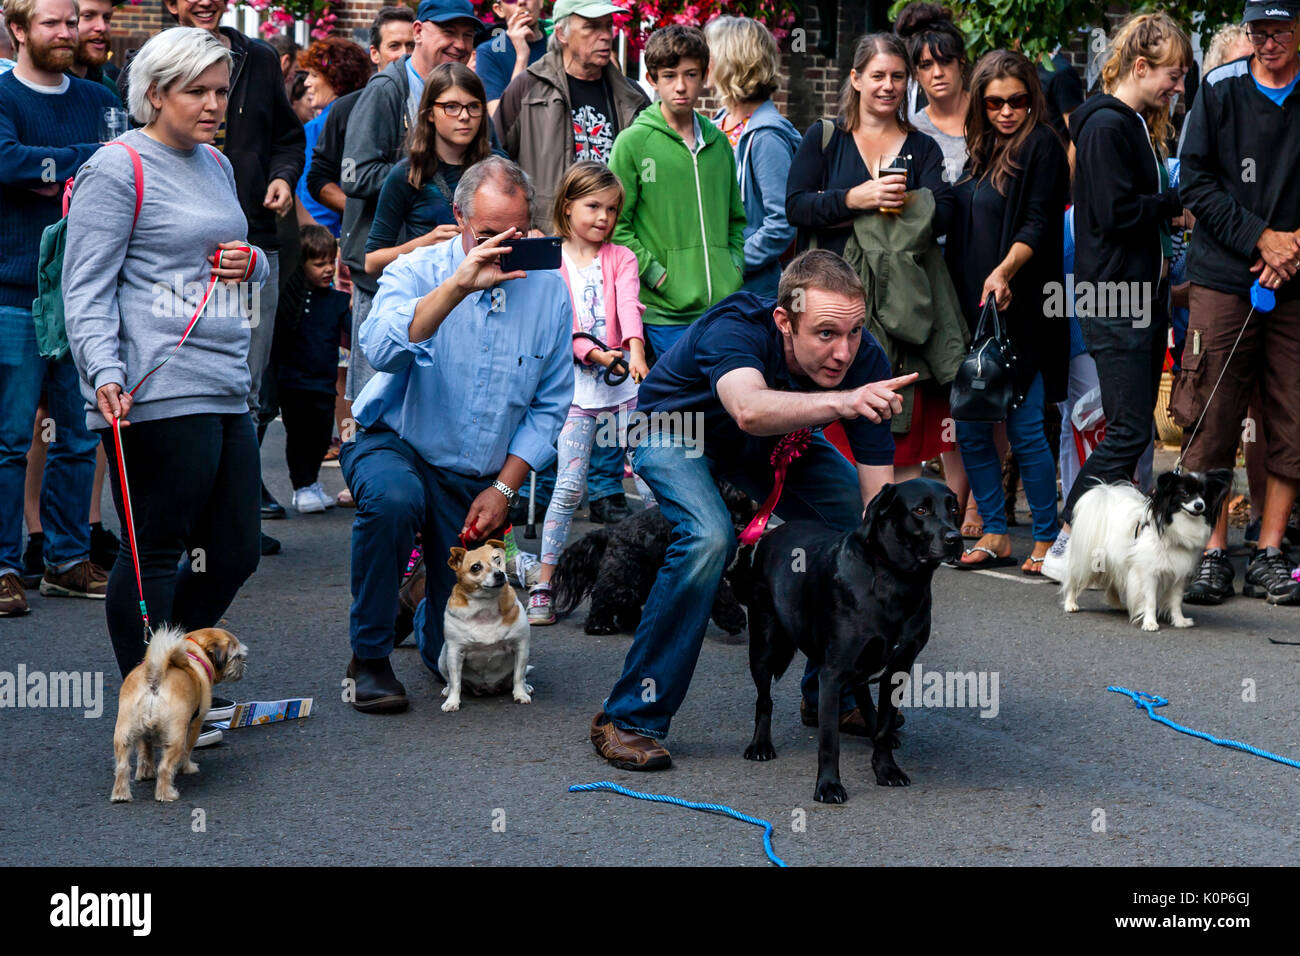 Dogs Compete In A Dog Show  At The Annual South Street Sports Day and Dog Show, Lewes, East Sussex, UK Stock Photo